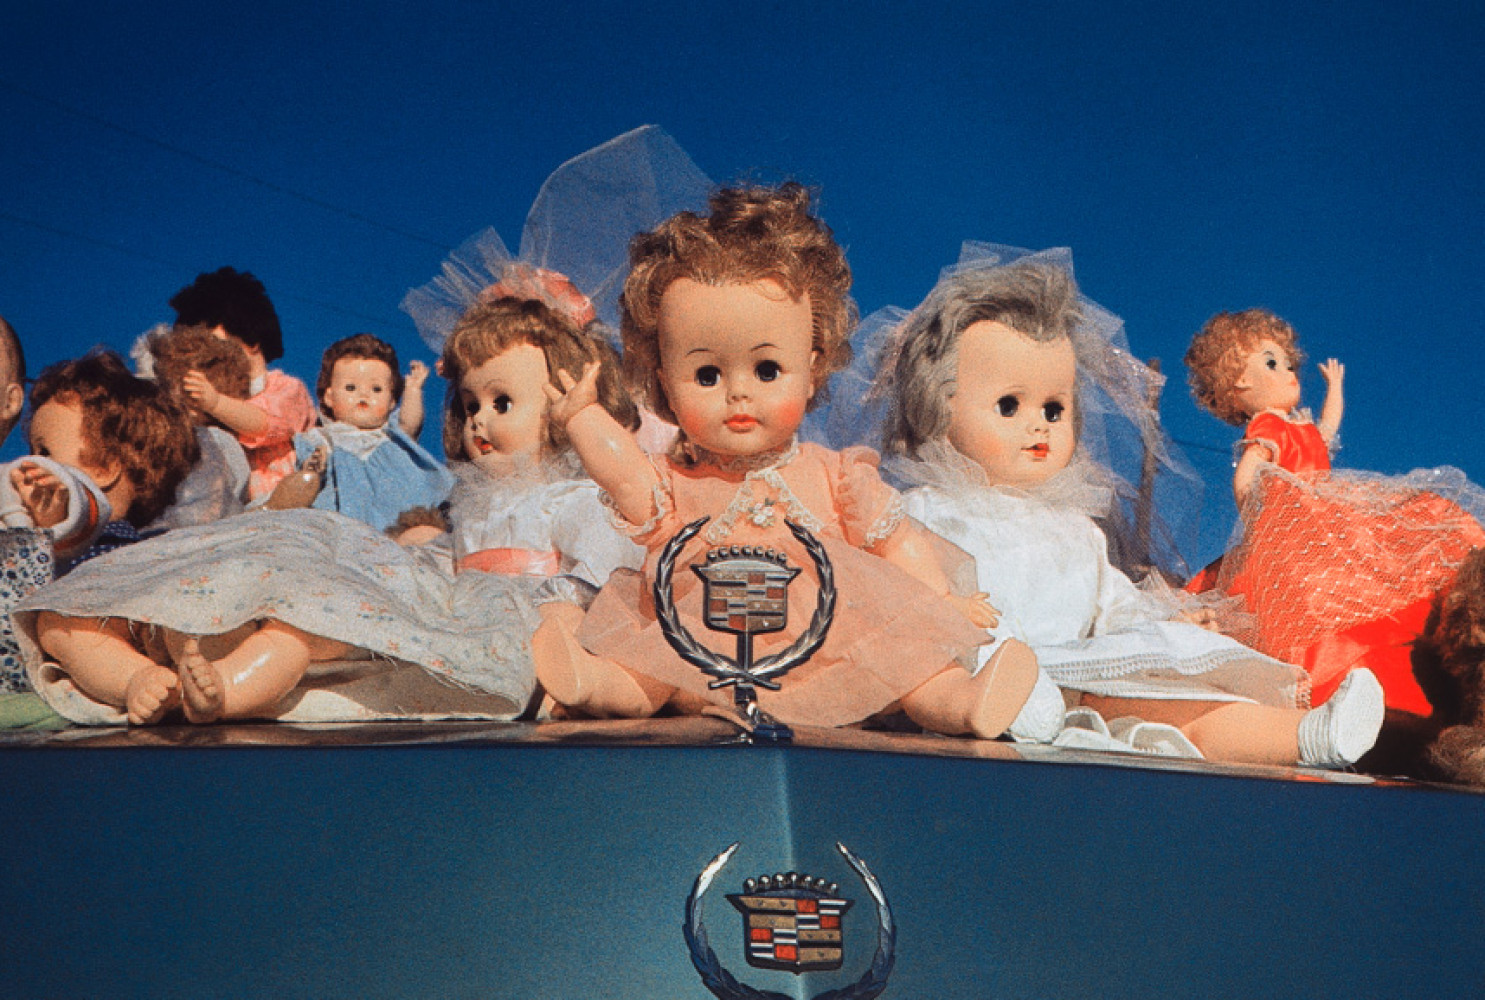 Untitled (Baby Doll Cadillac, Memphis, Tennessee) (detail), 1973, from 10.D.70.V2 Portfolio. Dye transfer print, 1996, 11 7/8 x 17 ¾ inches. © Eggleston Artistic Trust, courtesy of David Zwiner New York 